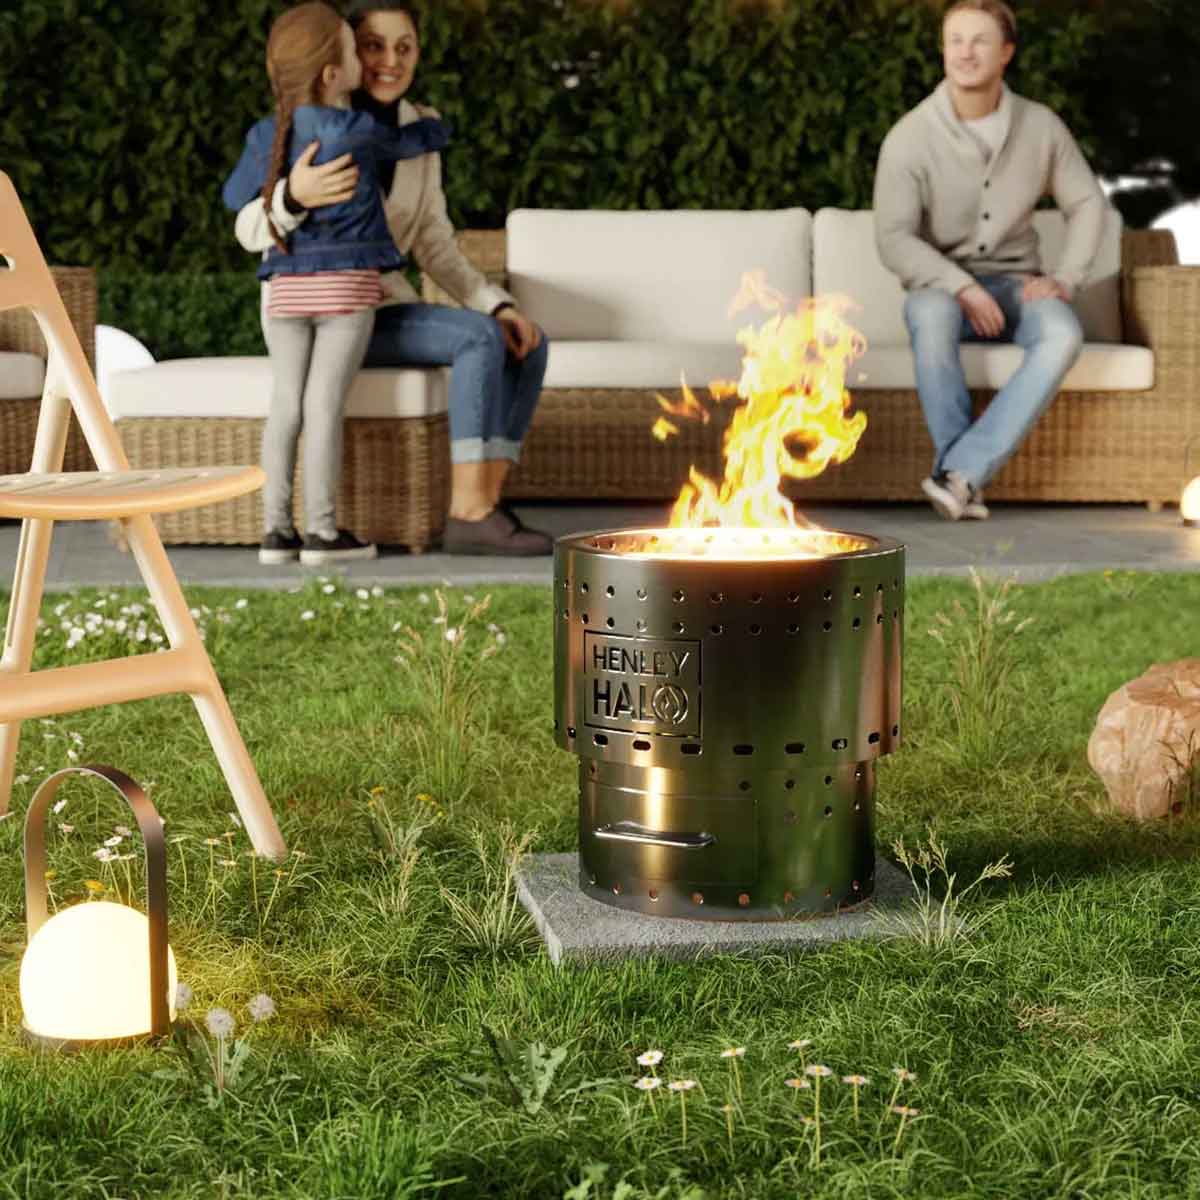 Halo firepit in the garde with a couple on an outdoor sofa